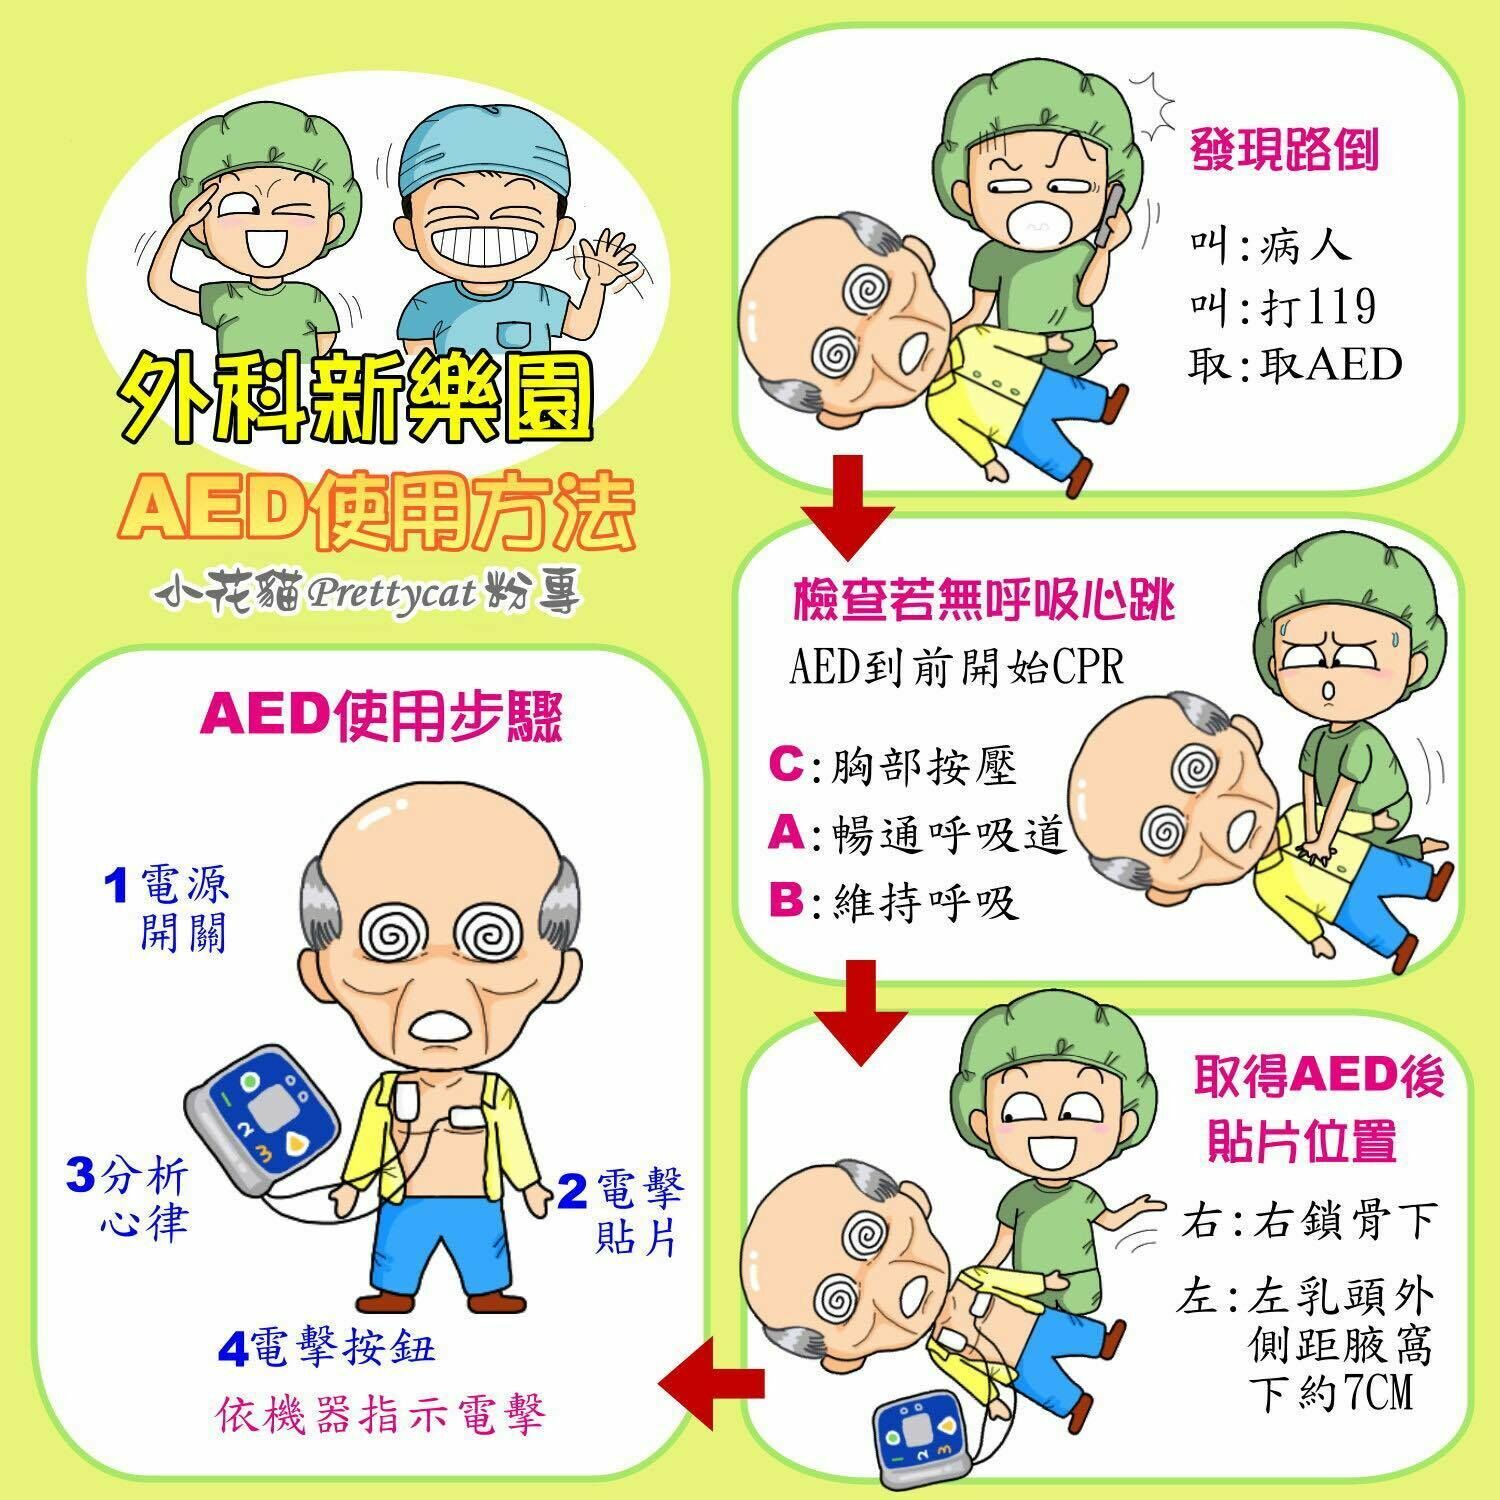 AED怎麽用阿？！-AED